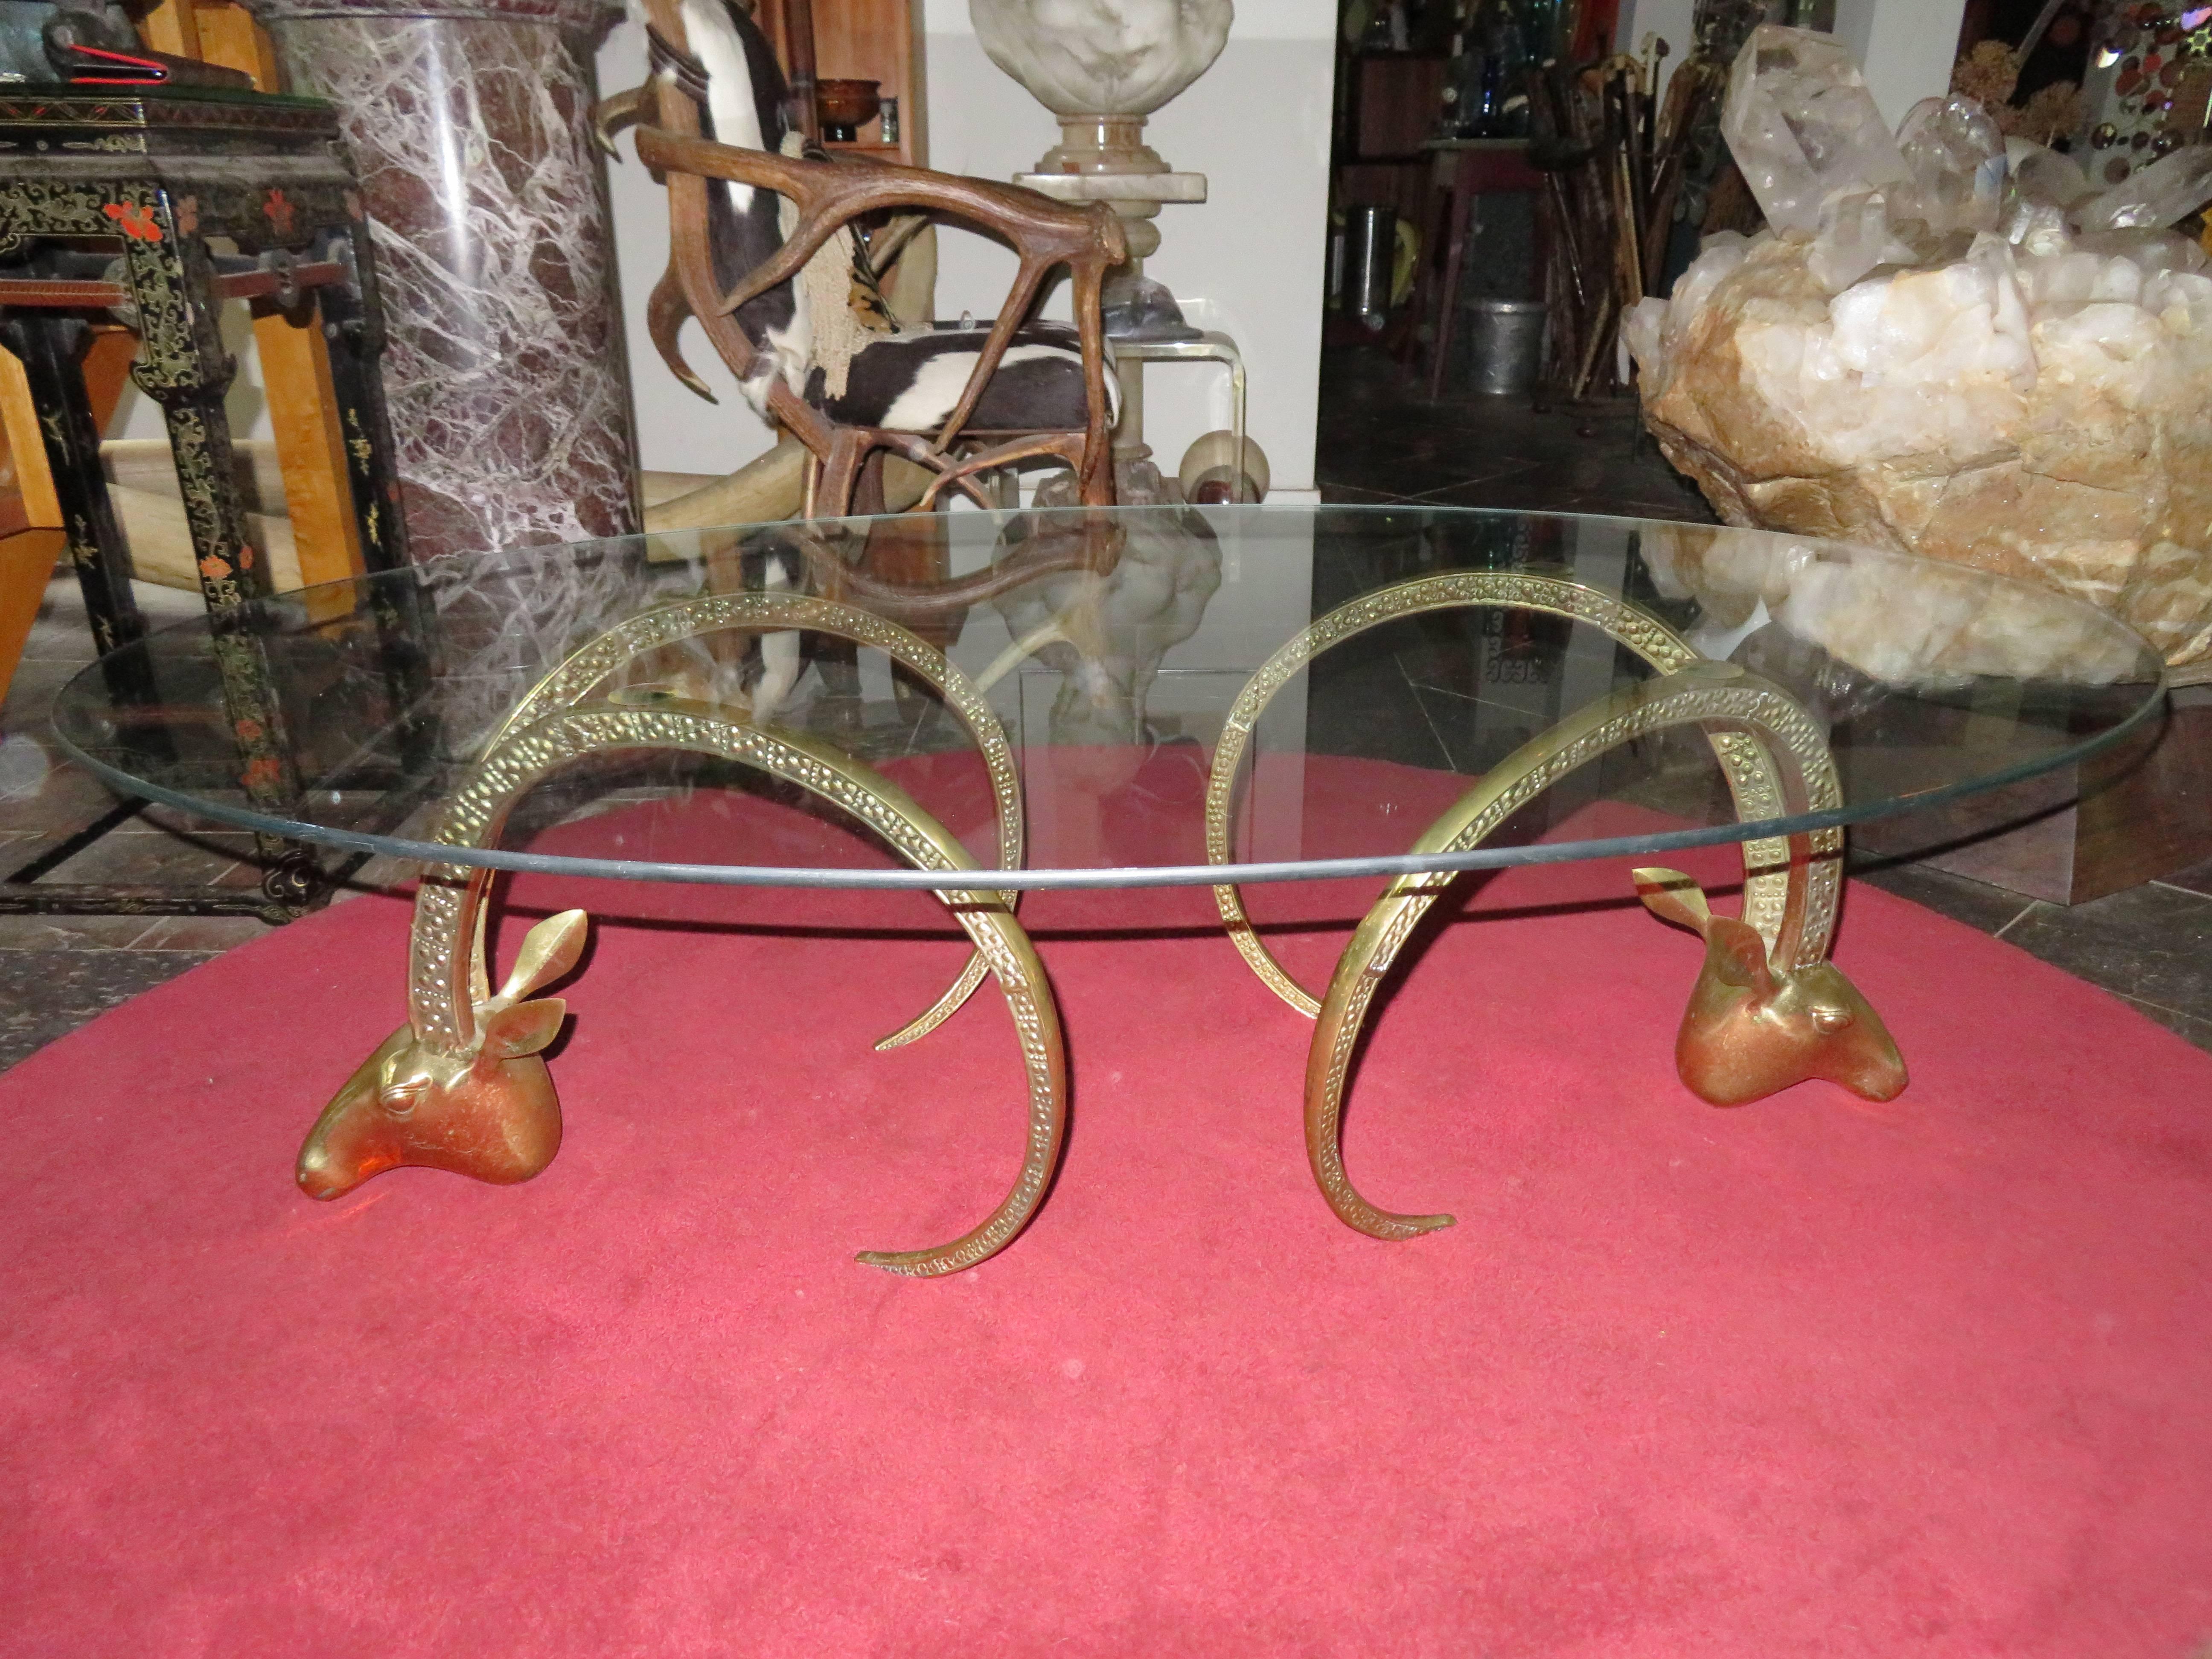 Magnificent Brass Ibex Ram Head Coffee Table Mid-Century Regency Modern For Sale 1